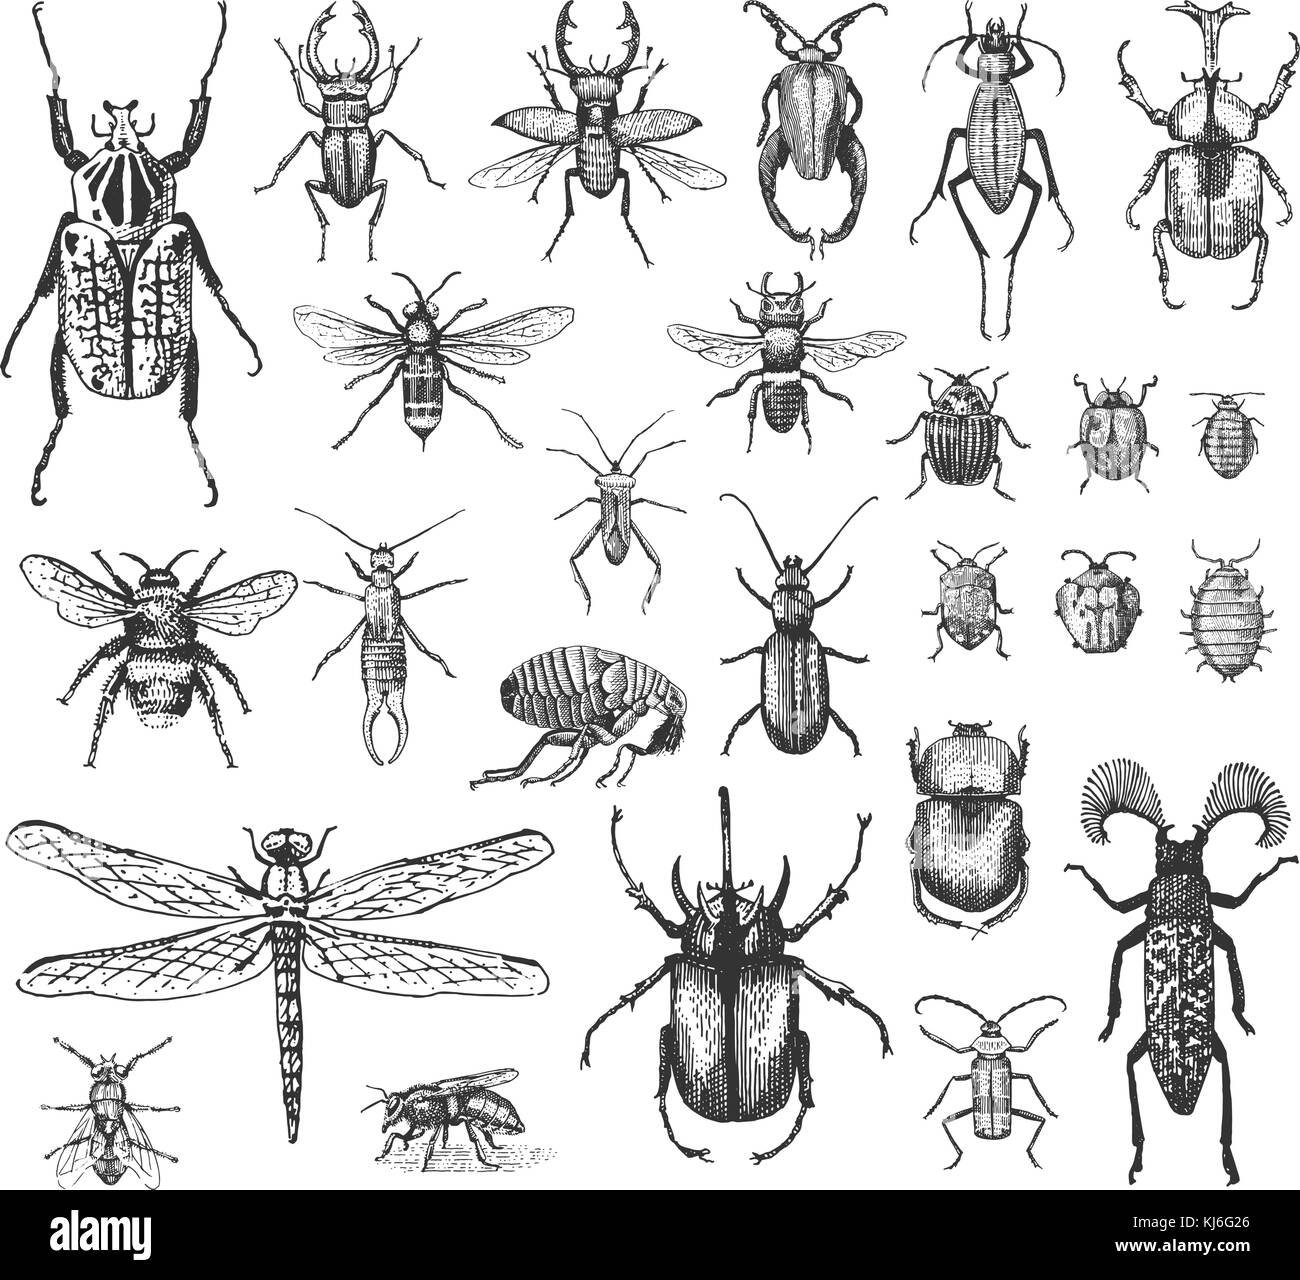 big set of insects bugs beetles and bees many species in vintage old hand drawn style engraved illustration woodcut. Stock Vector